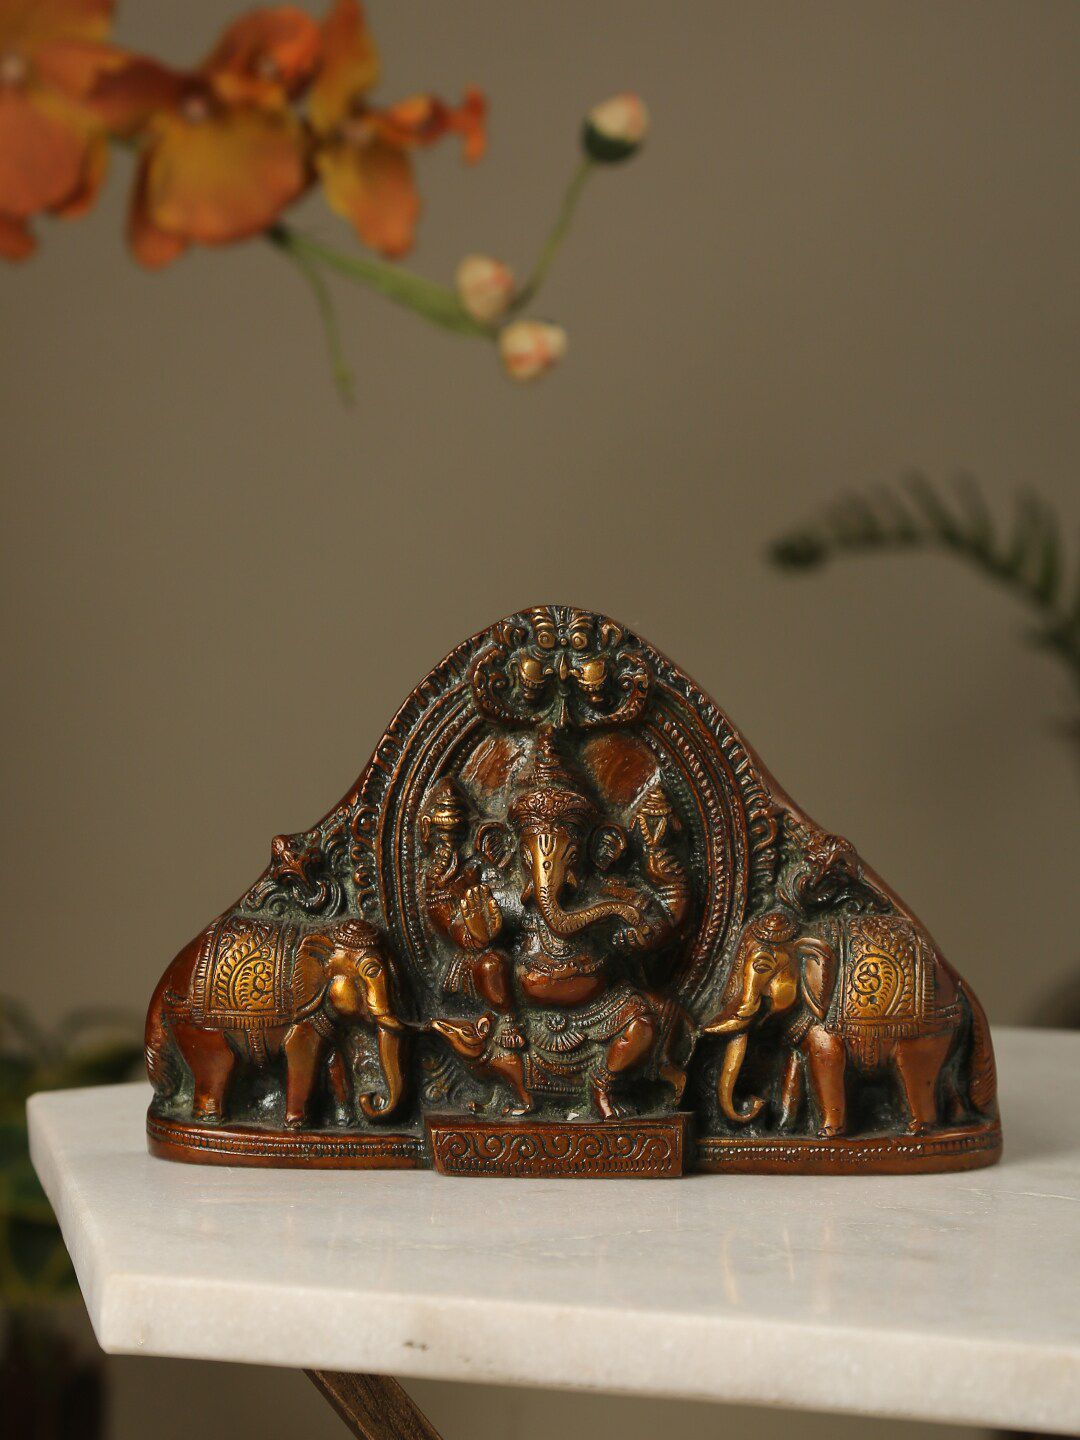 Amoliconcepts Gold-Toned Ganesha Statue With Elephants Idol Showpieces Price in India